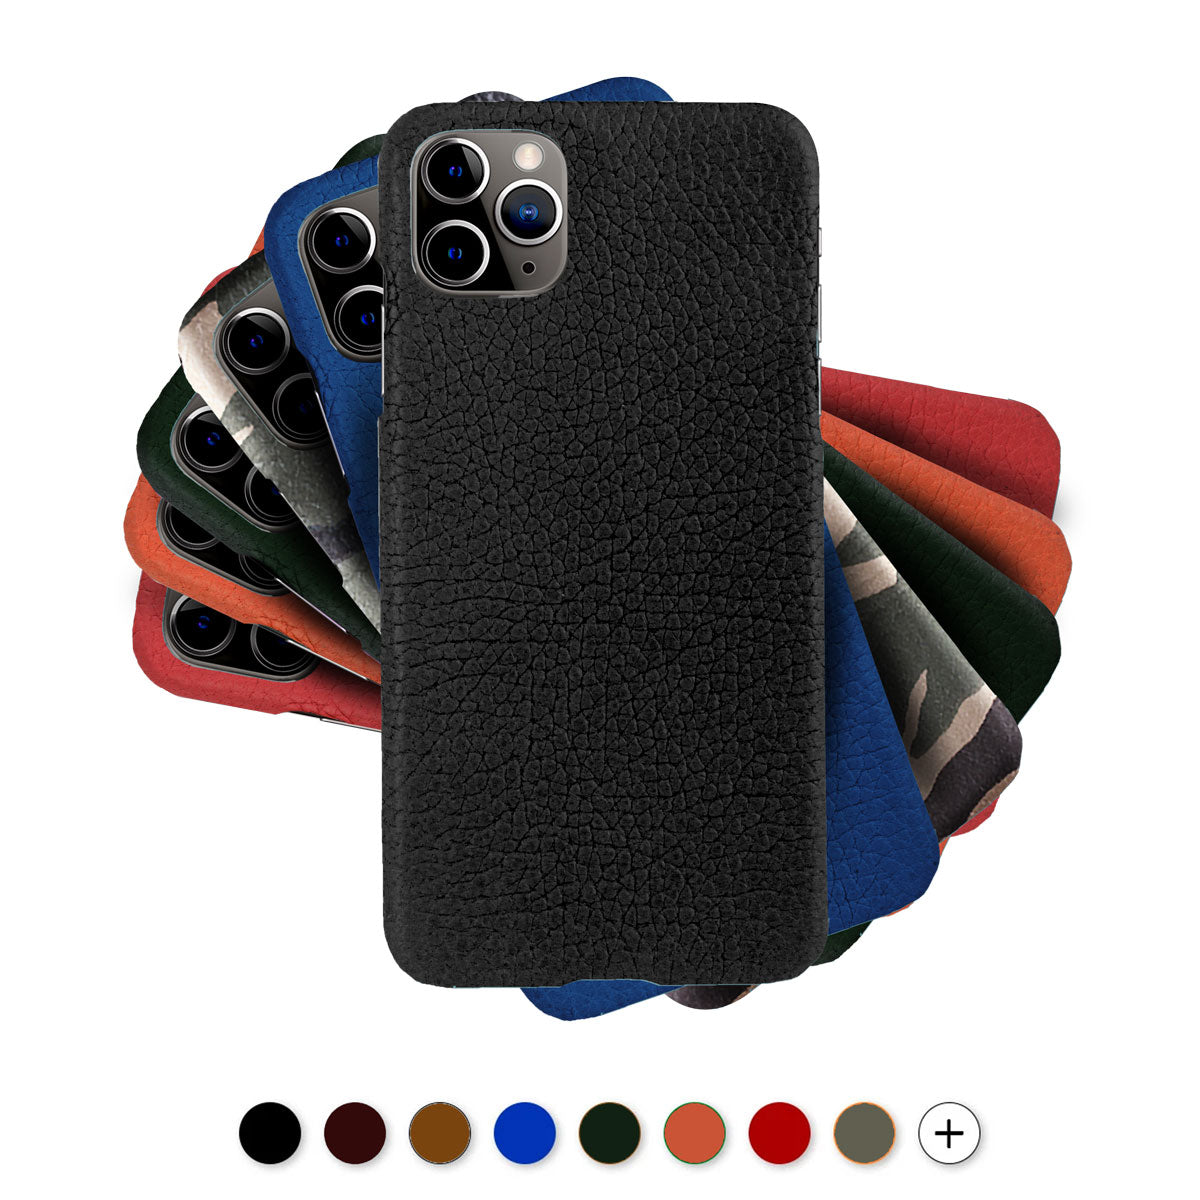 Leather iPhone case / cover - iPhone 12 & 11 ( Pro / Max / Mini ) - Buffalo leather , black , Dark brown , blue , red...